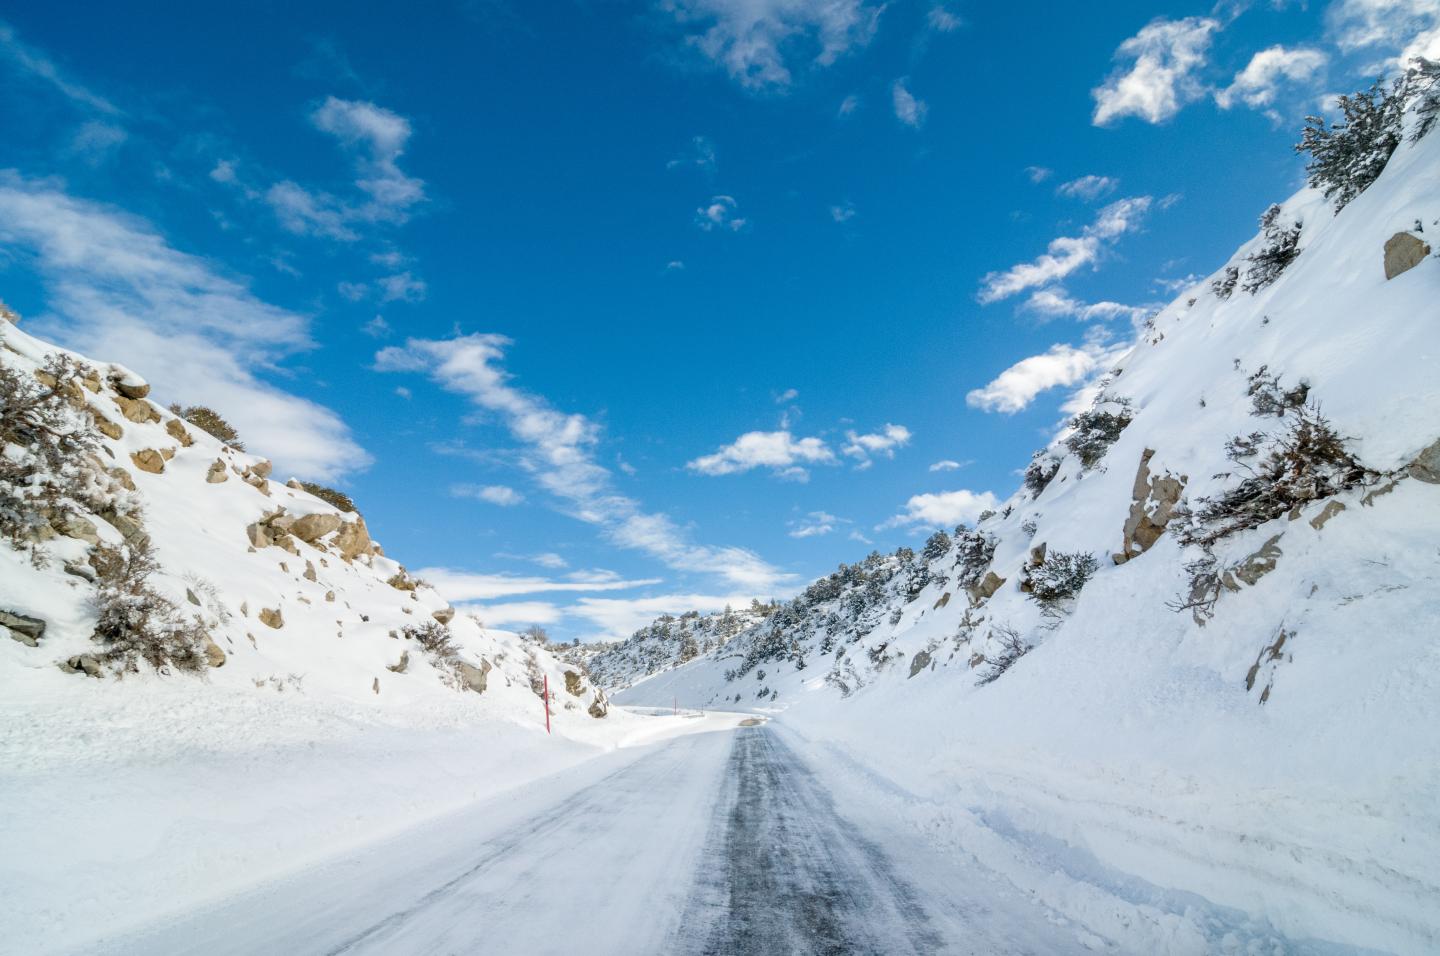 A snow covered road in the Sierra Nevada mountains of California